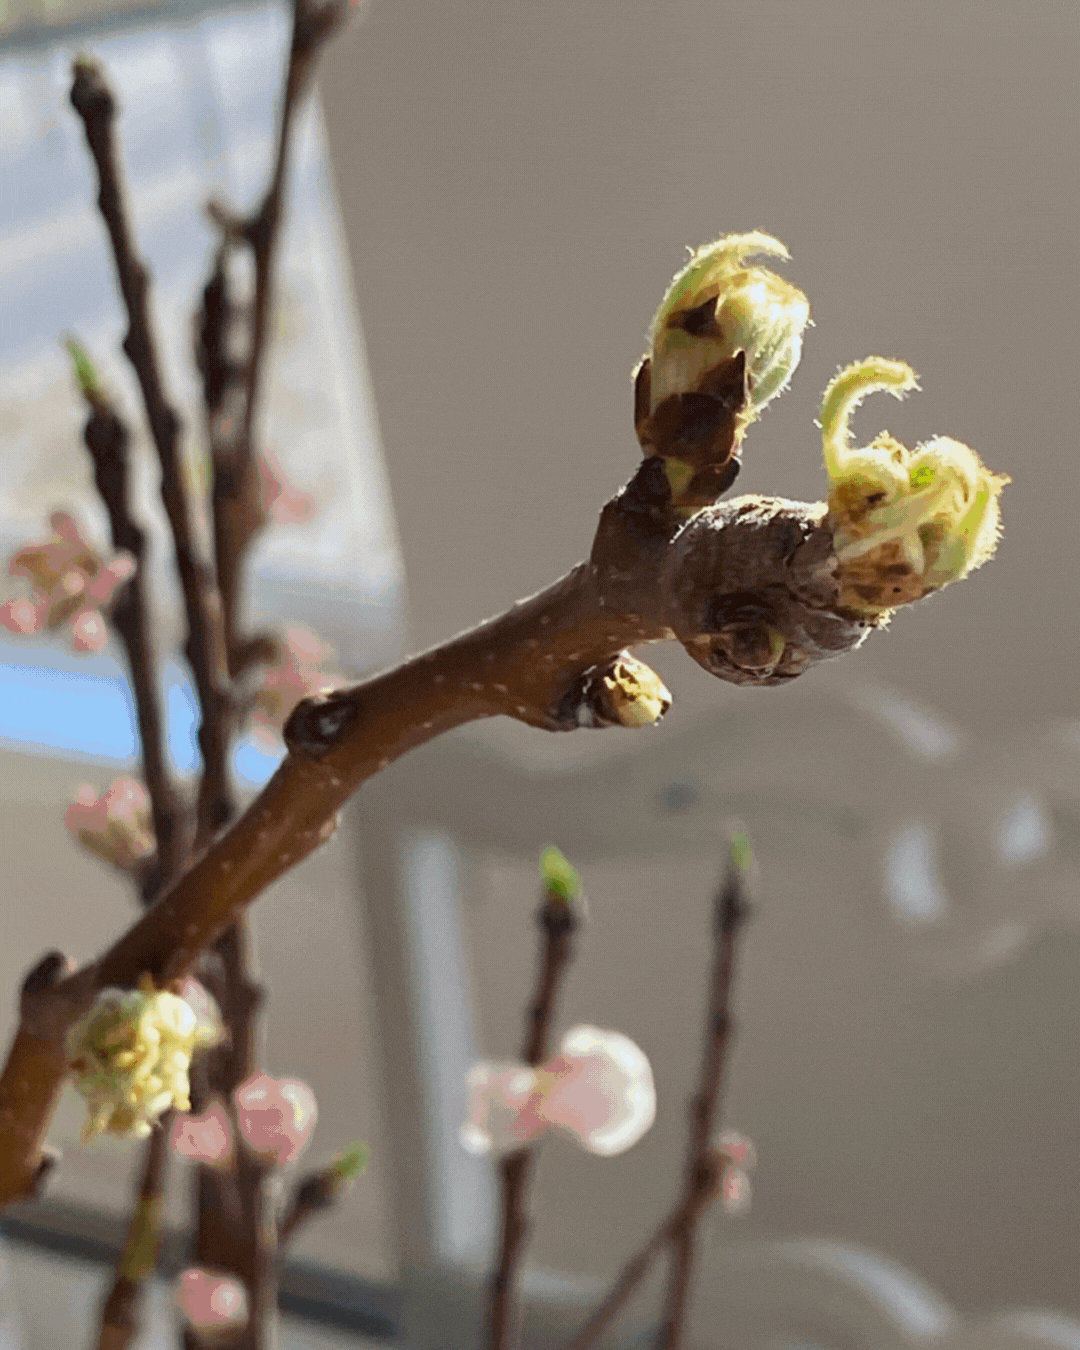 Timelapse of five photos of green buds and white pear blossoms inside our kitchen, paintings in the background.